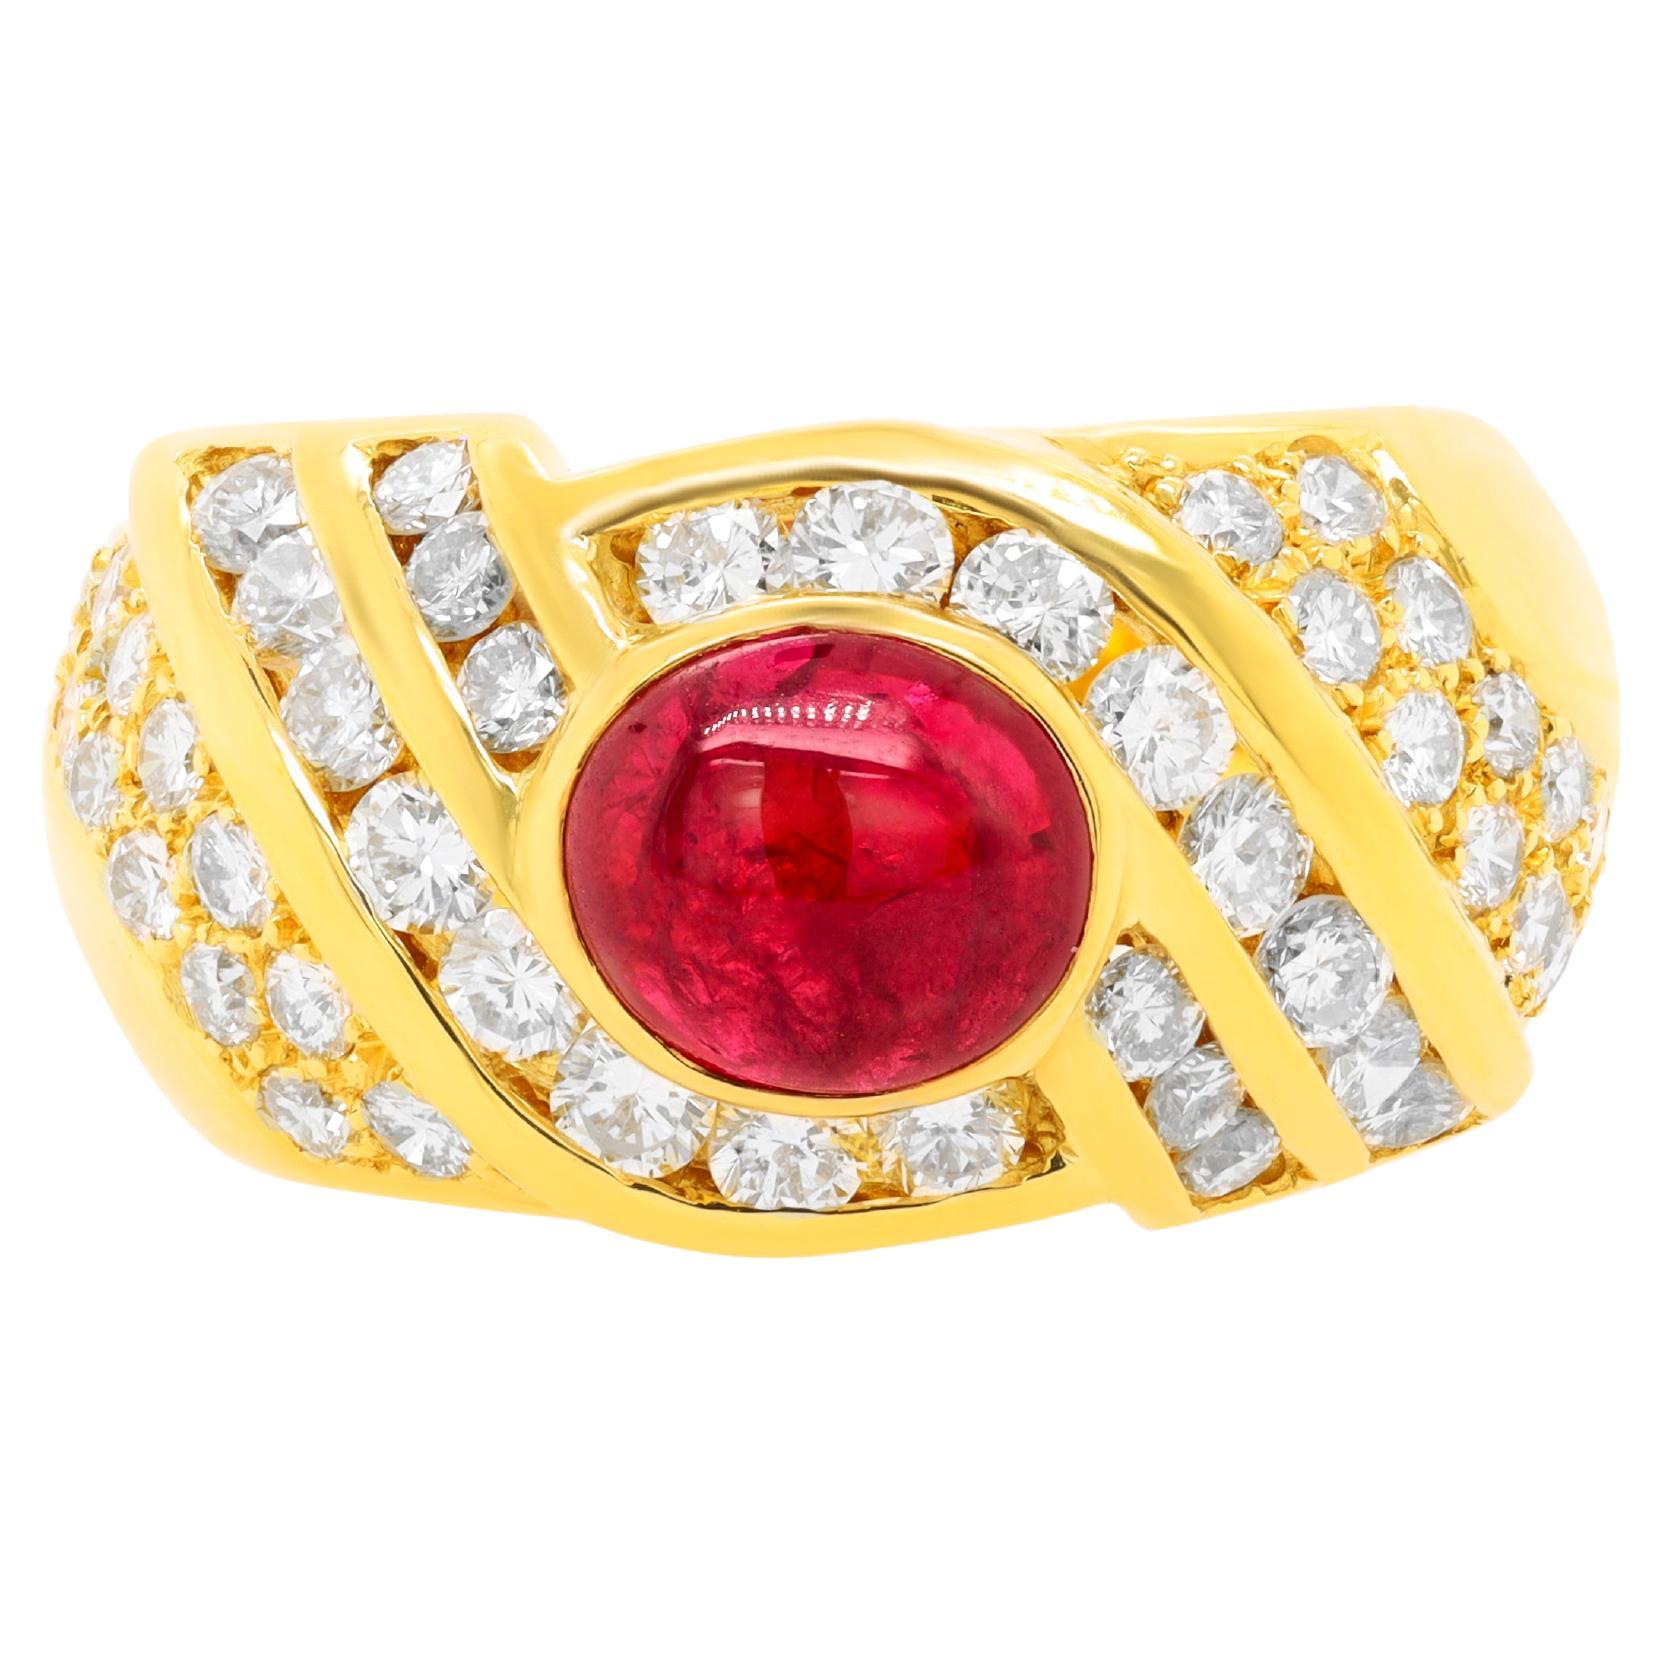 Diana M.18 kt yellow gold ruby and diamond fashion ring featuring a center 1.50 